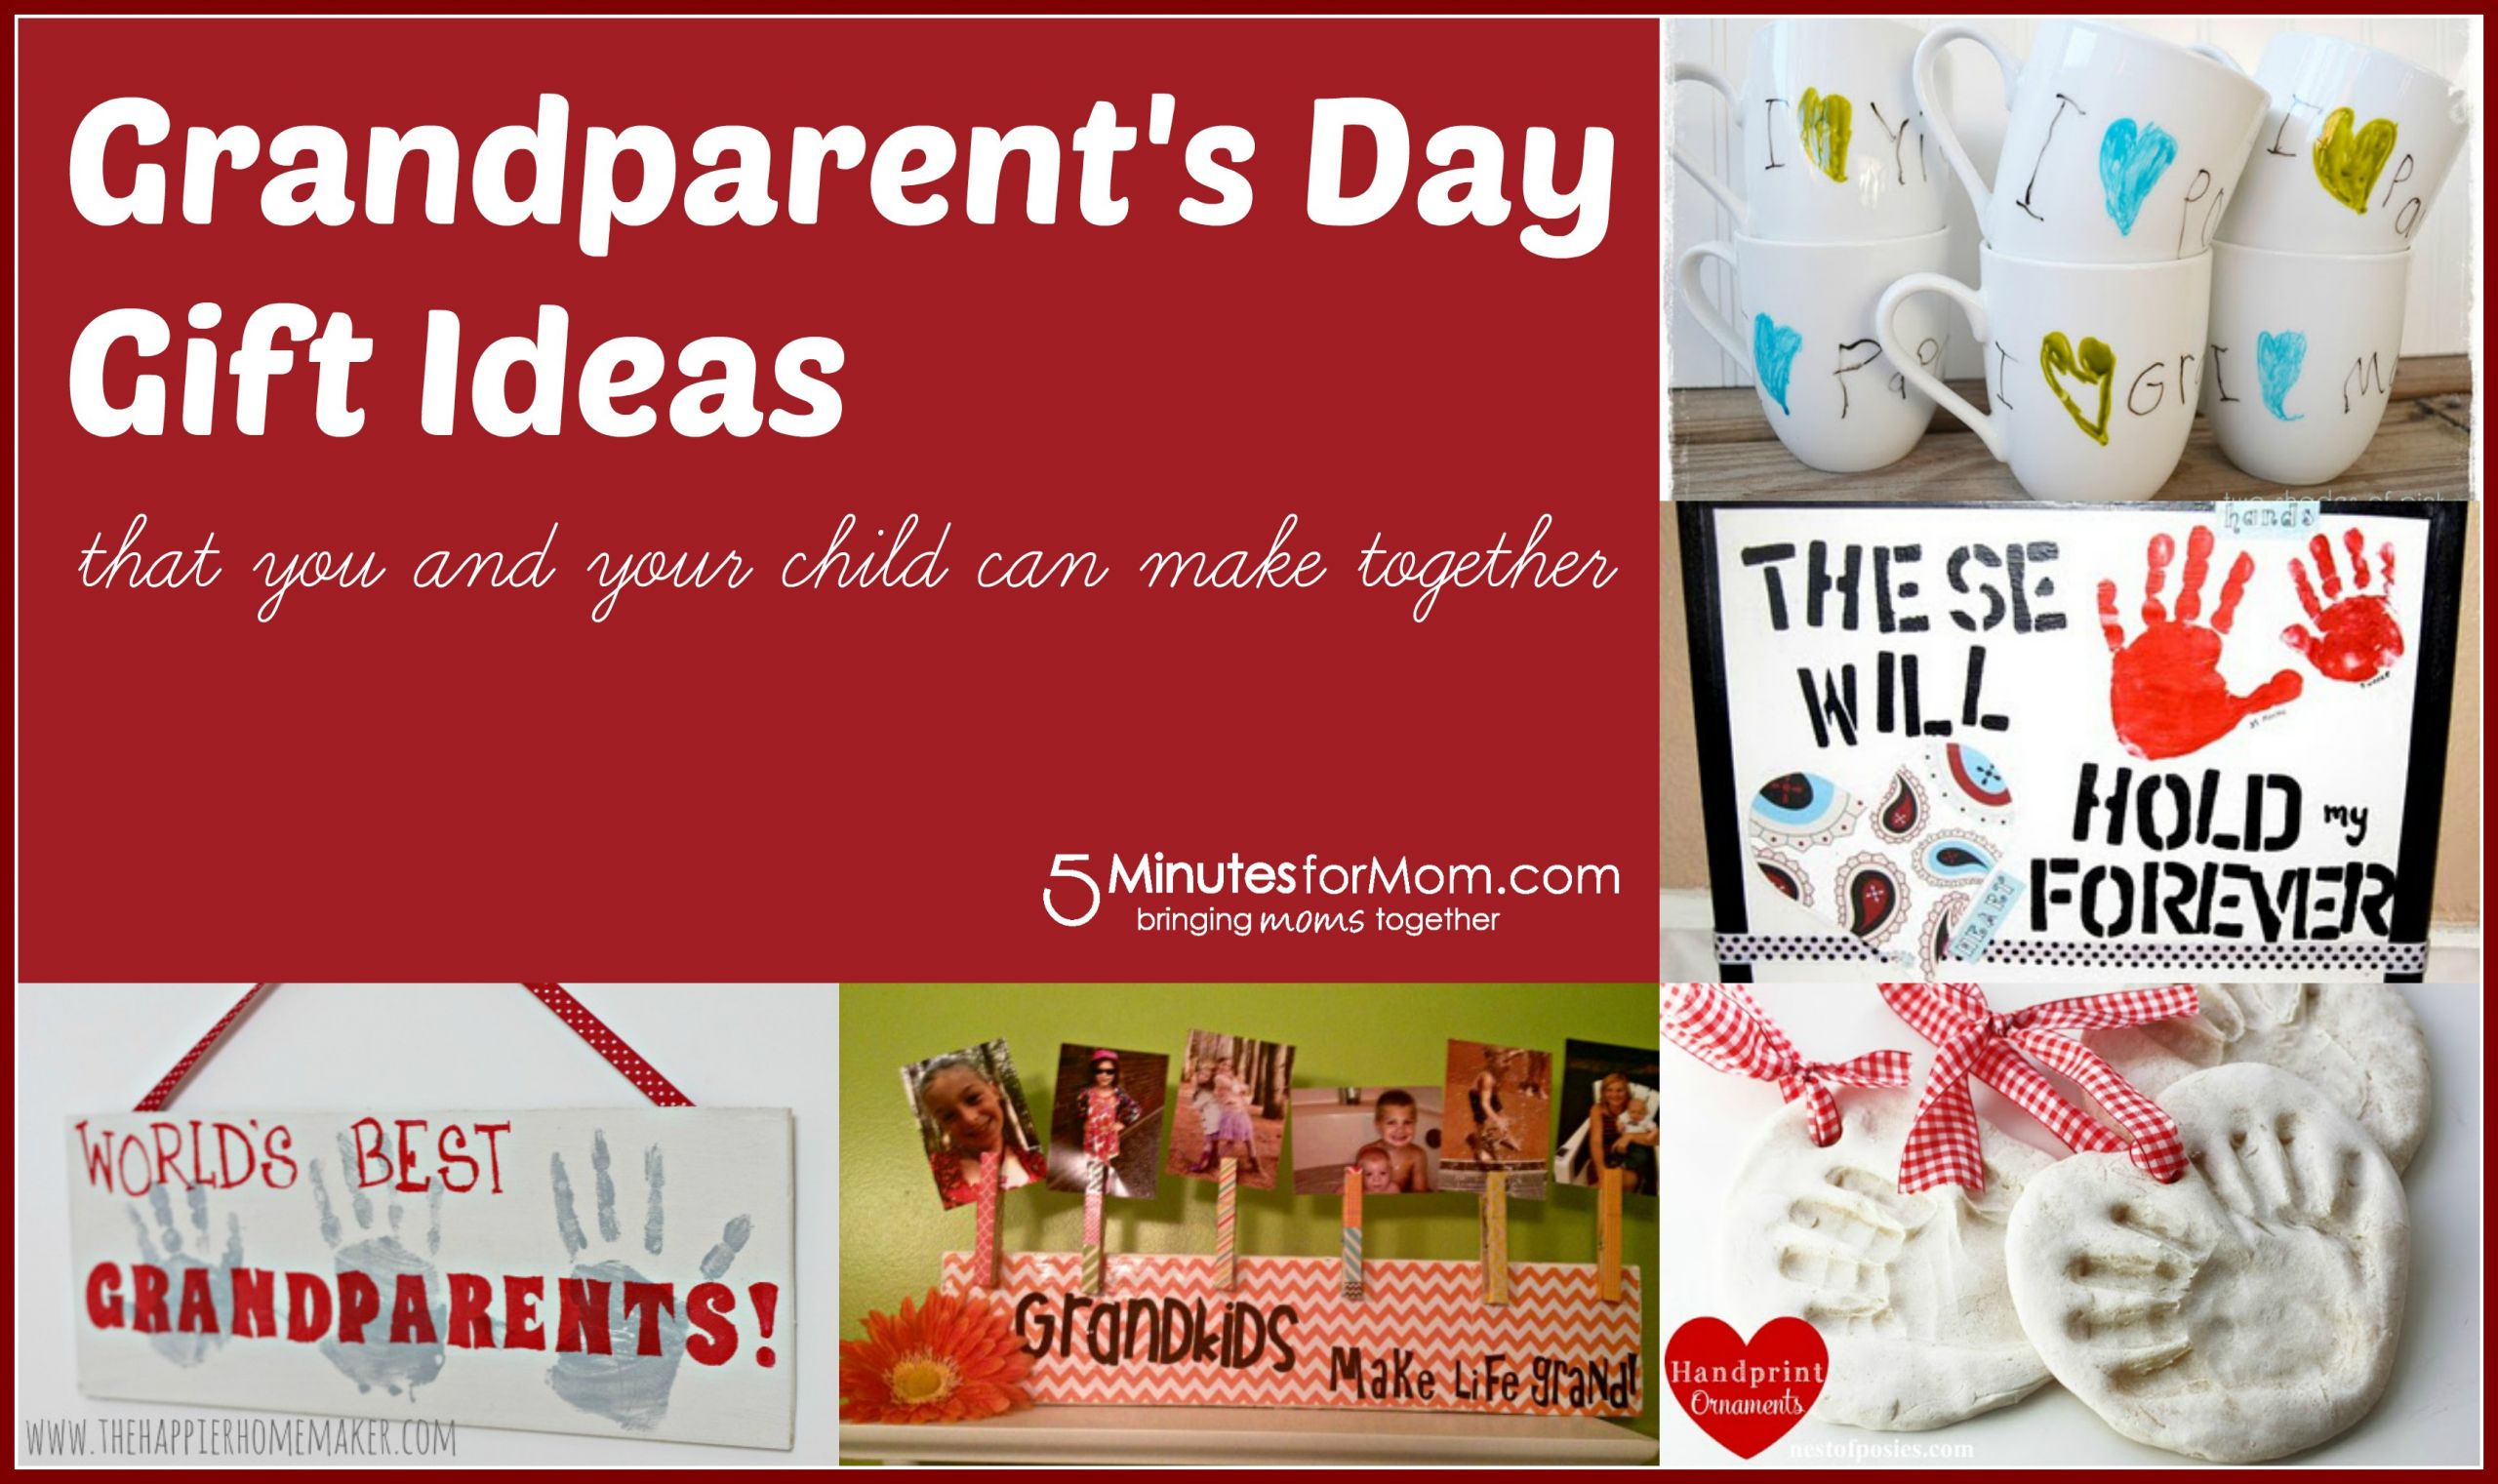 Grandfathers Day Gift Ideas
 Grandparent s Day Gift Ideas